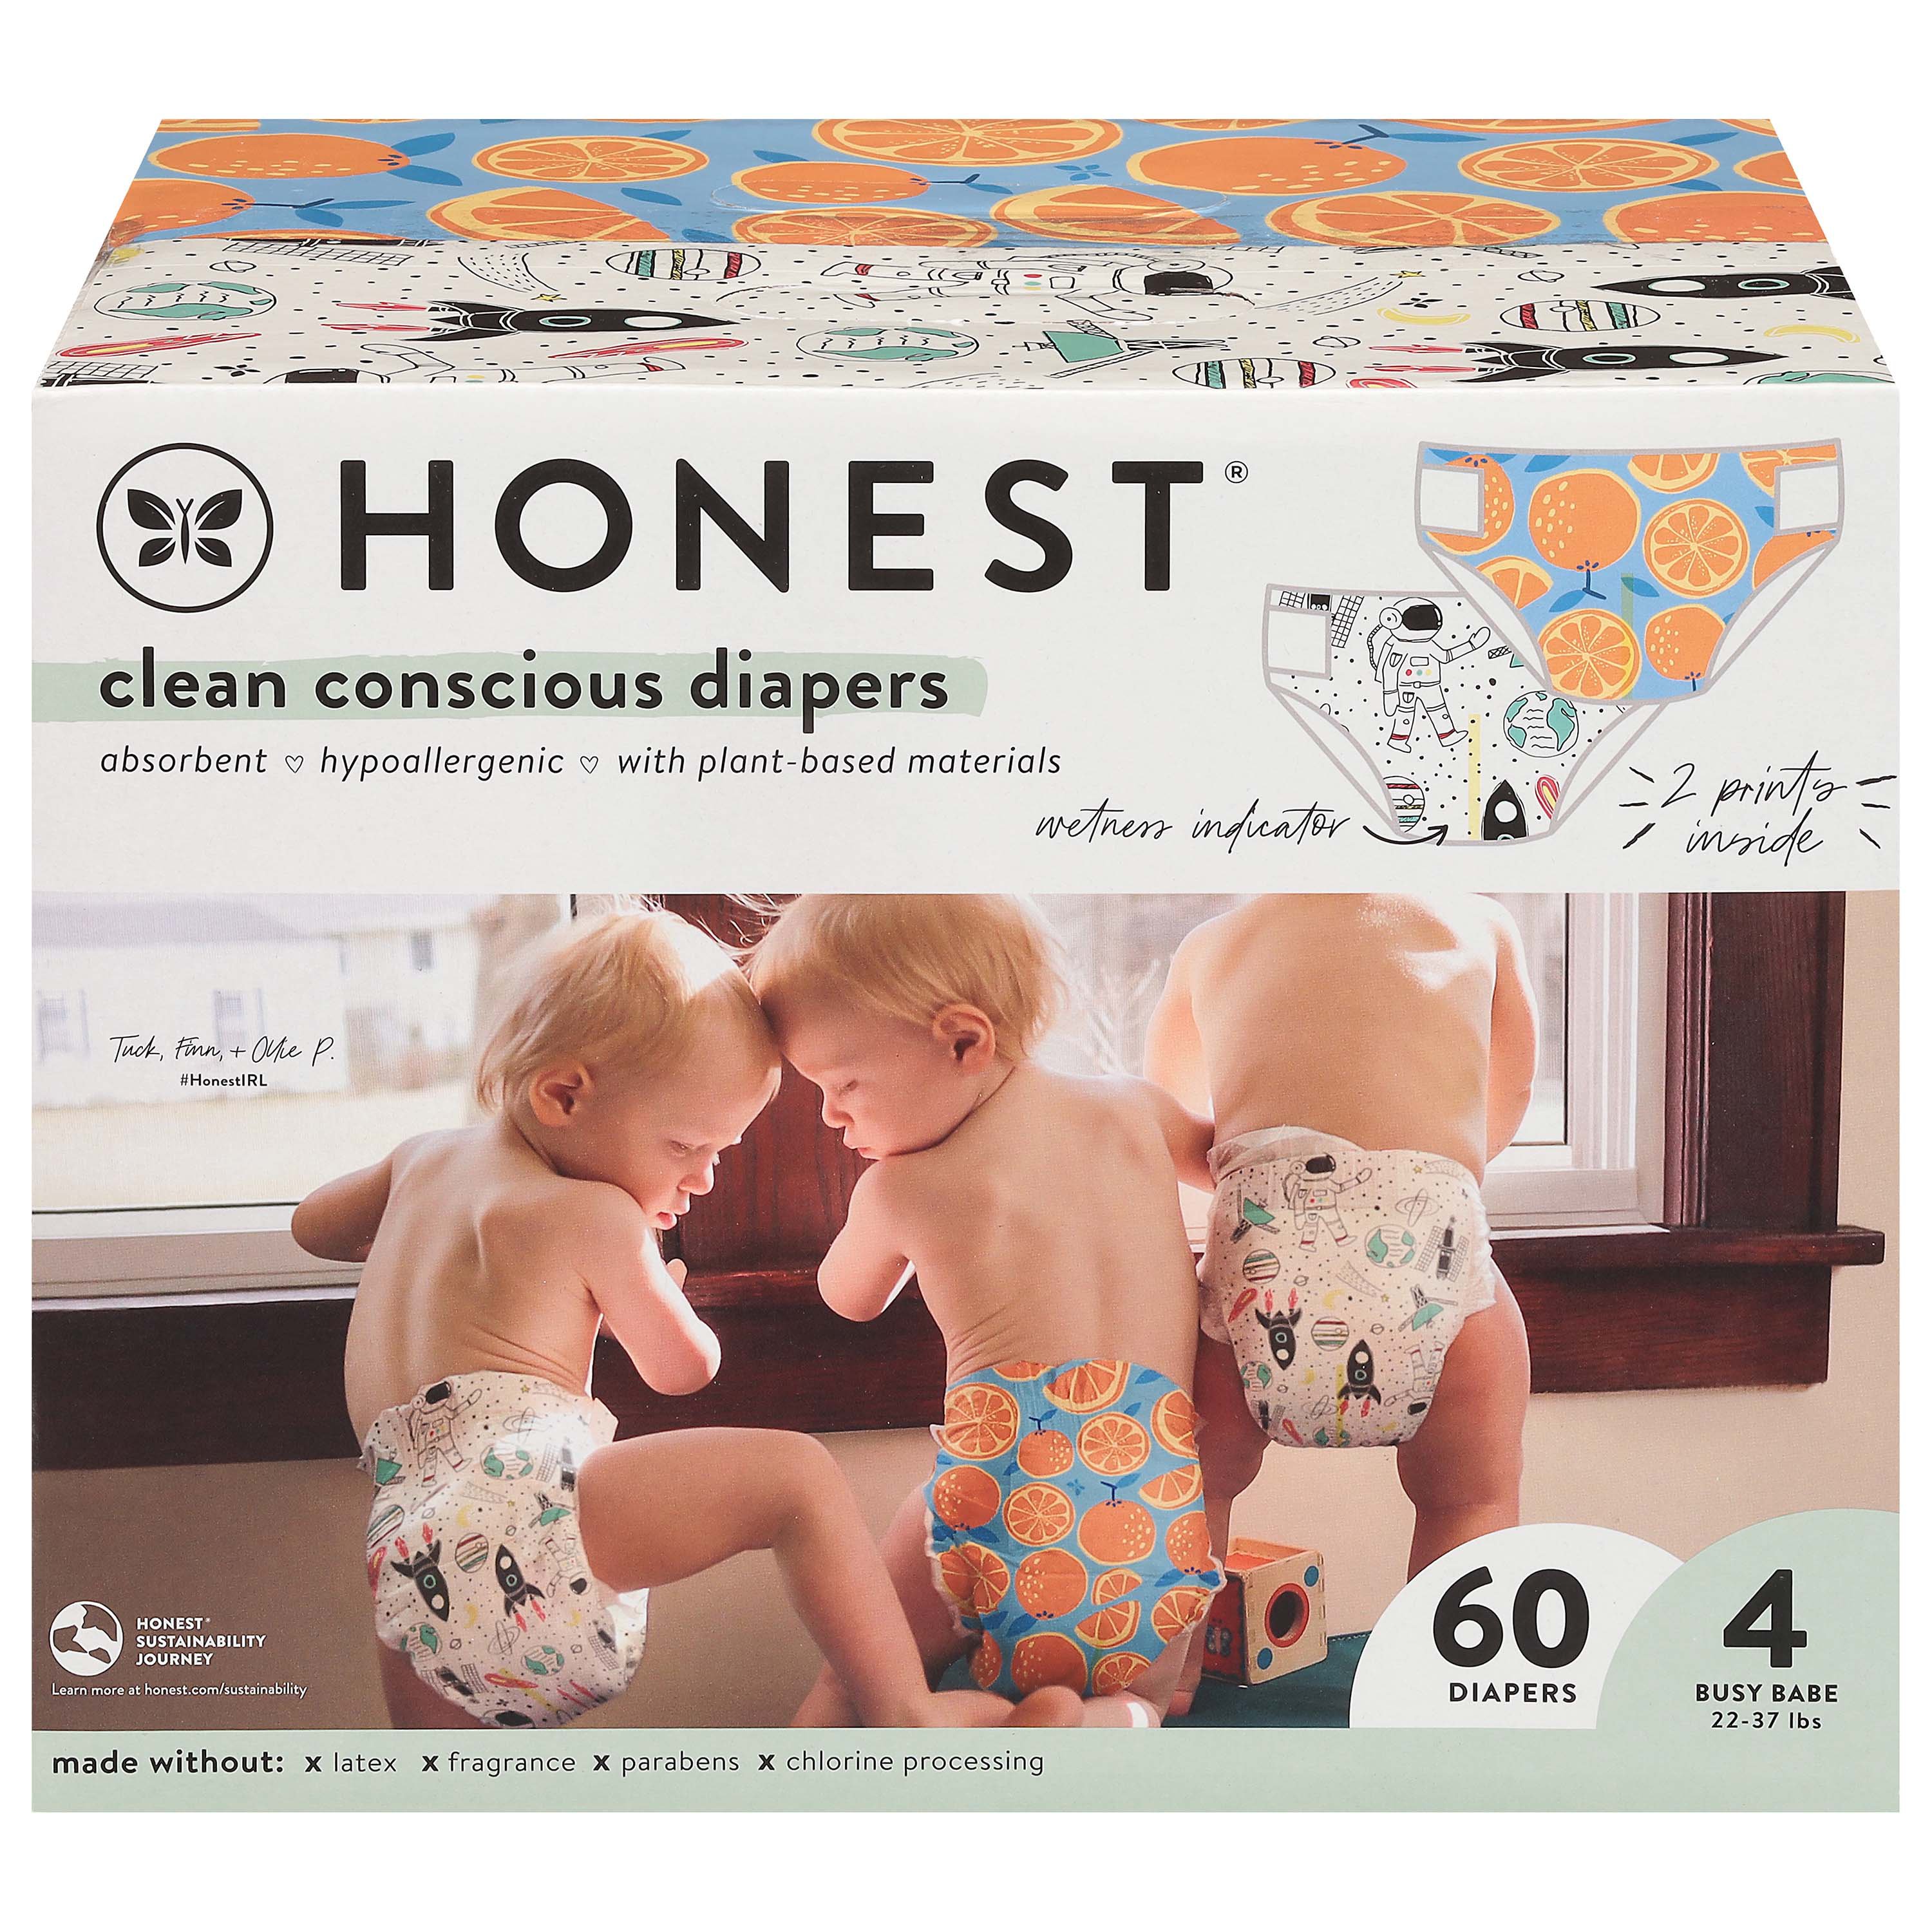 The Newborn Gift, High-performing, Clean, Super Absorbent Diapers